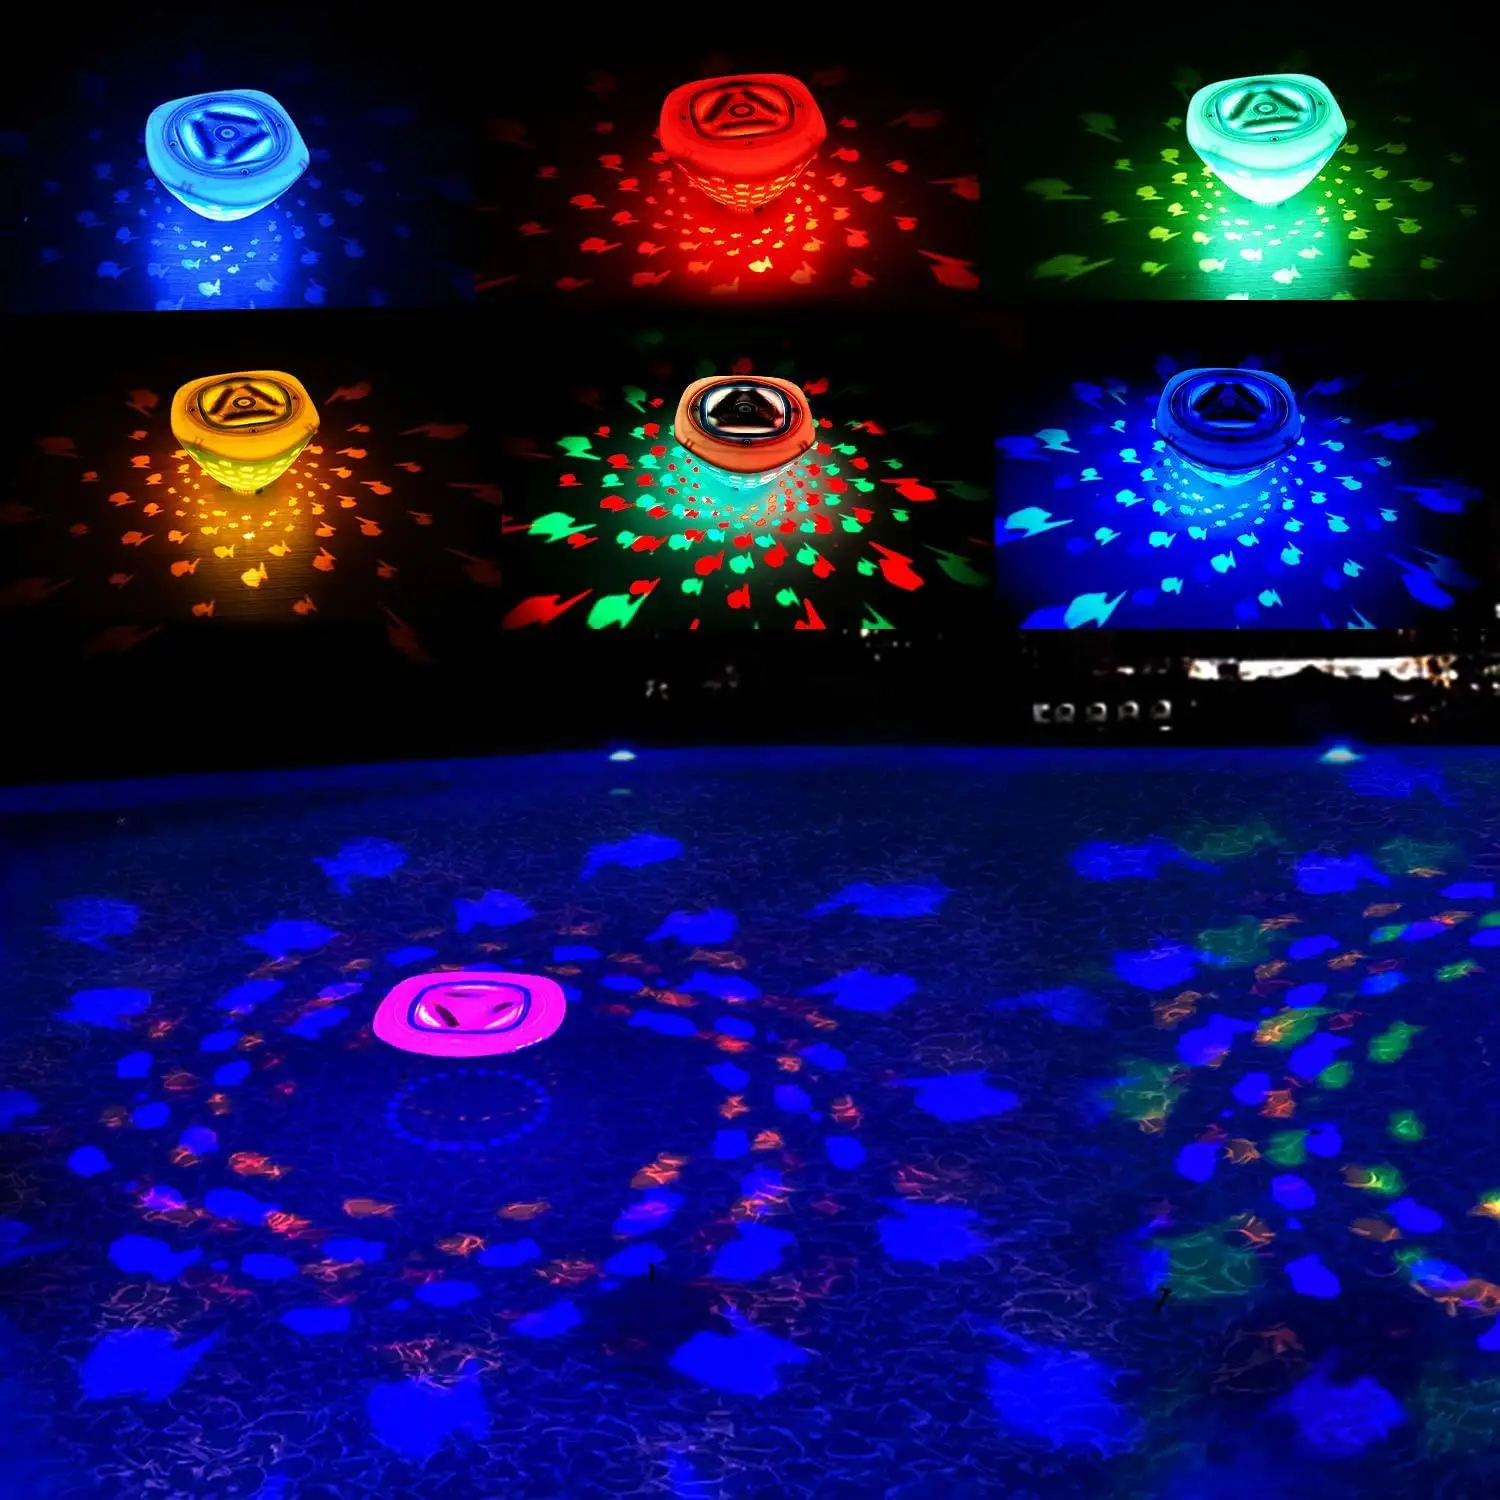 

Floating Swim Pool Lights Waterproof Colorful Battery Operaed Submersible Pond Bathtub Hot tub Spa Fountain Projector Kids Gifts